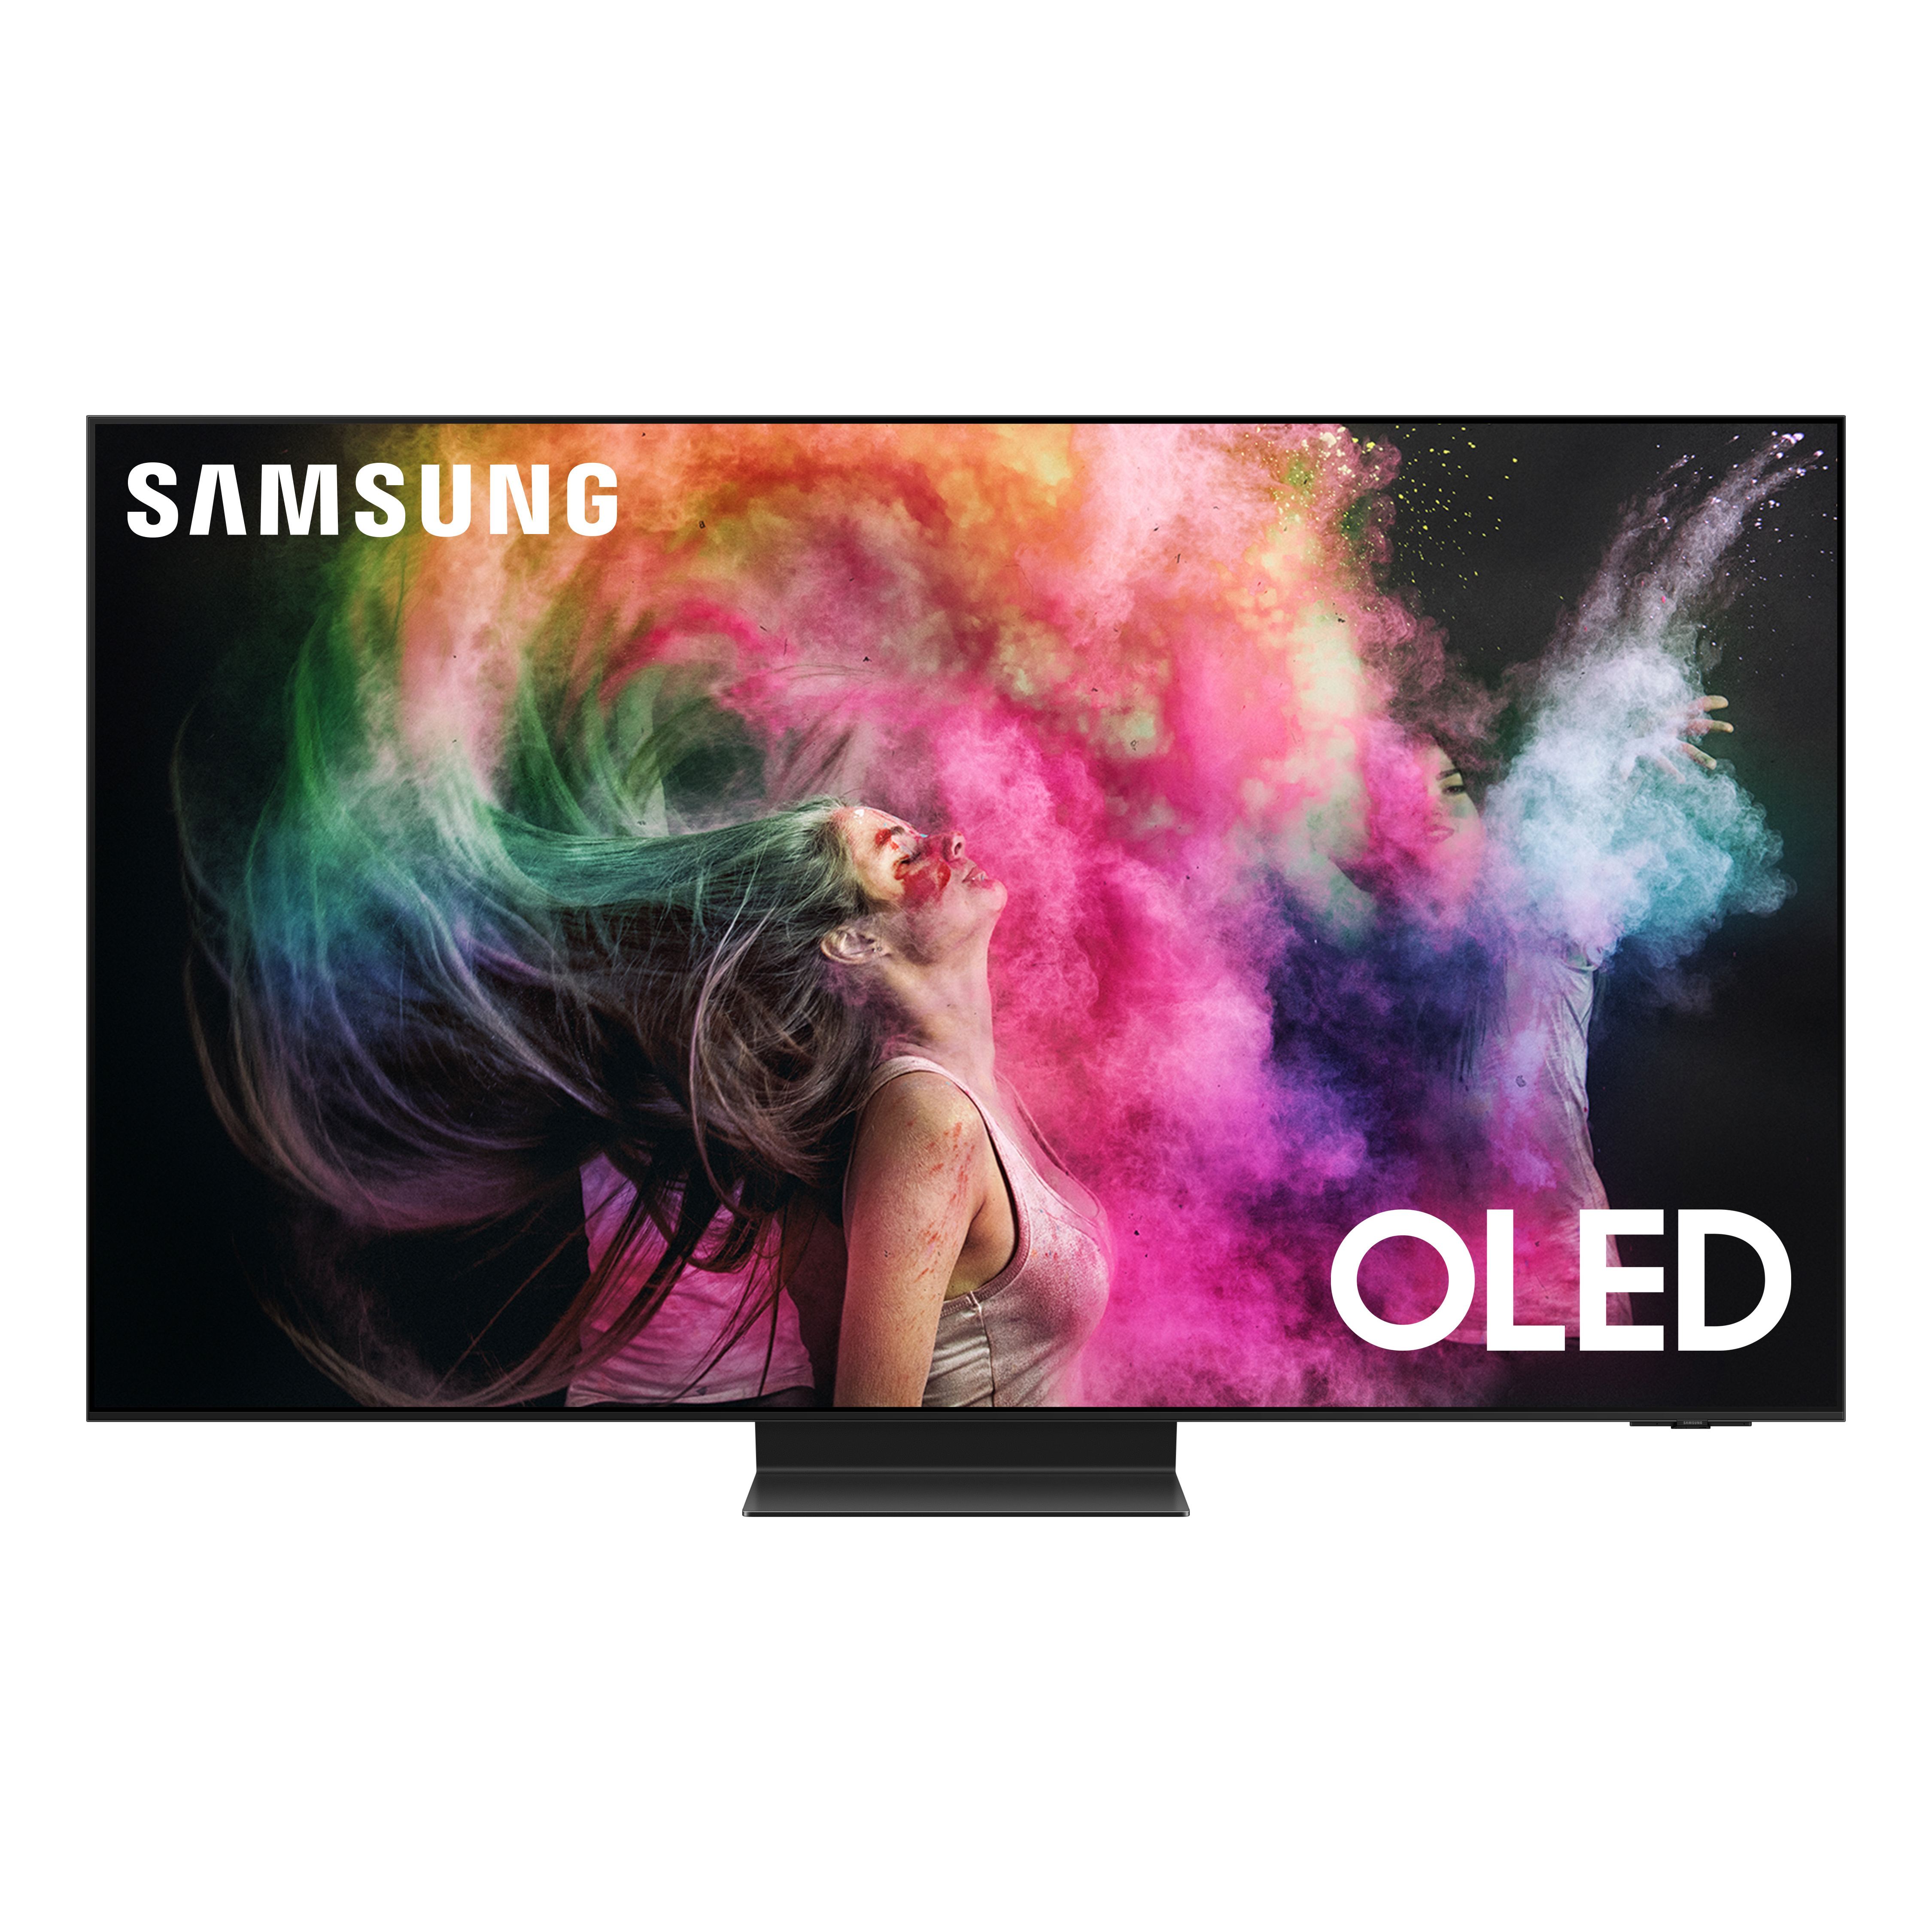 Samsung's full 2023 lineup of OLED and Neo QLED TVs is now available